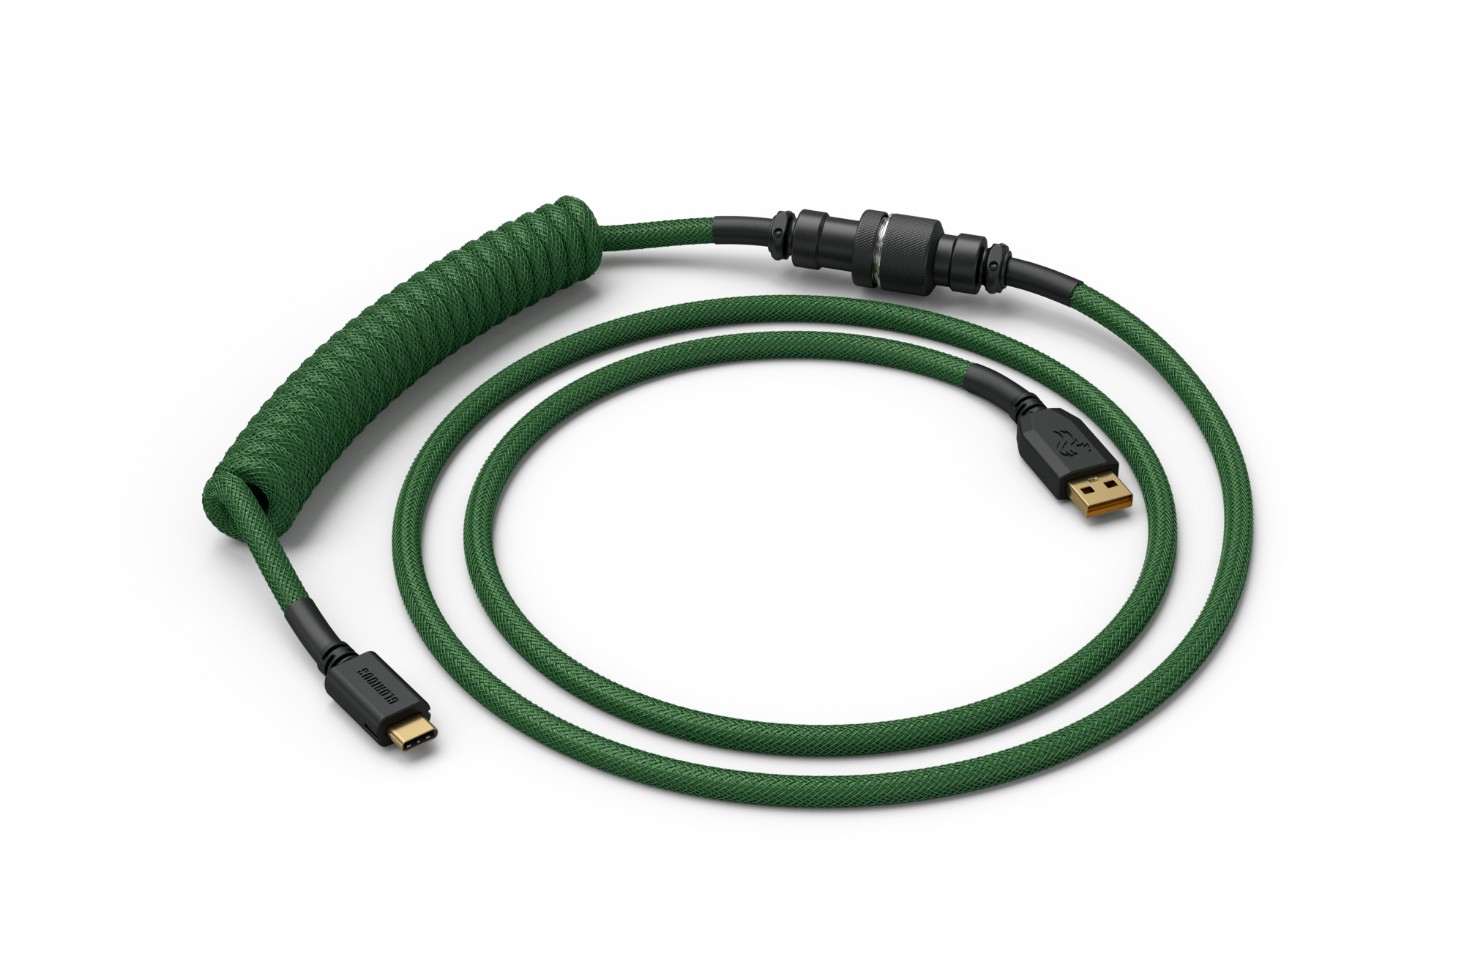 Glorious PC Gaming Race Coiled Cable Forest Green, USB-C to USB-A Spiralcable - 1,37m, green